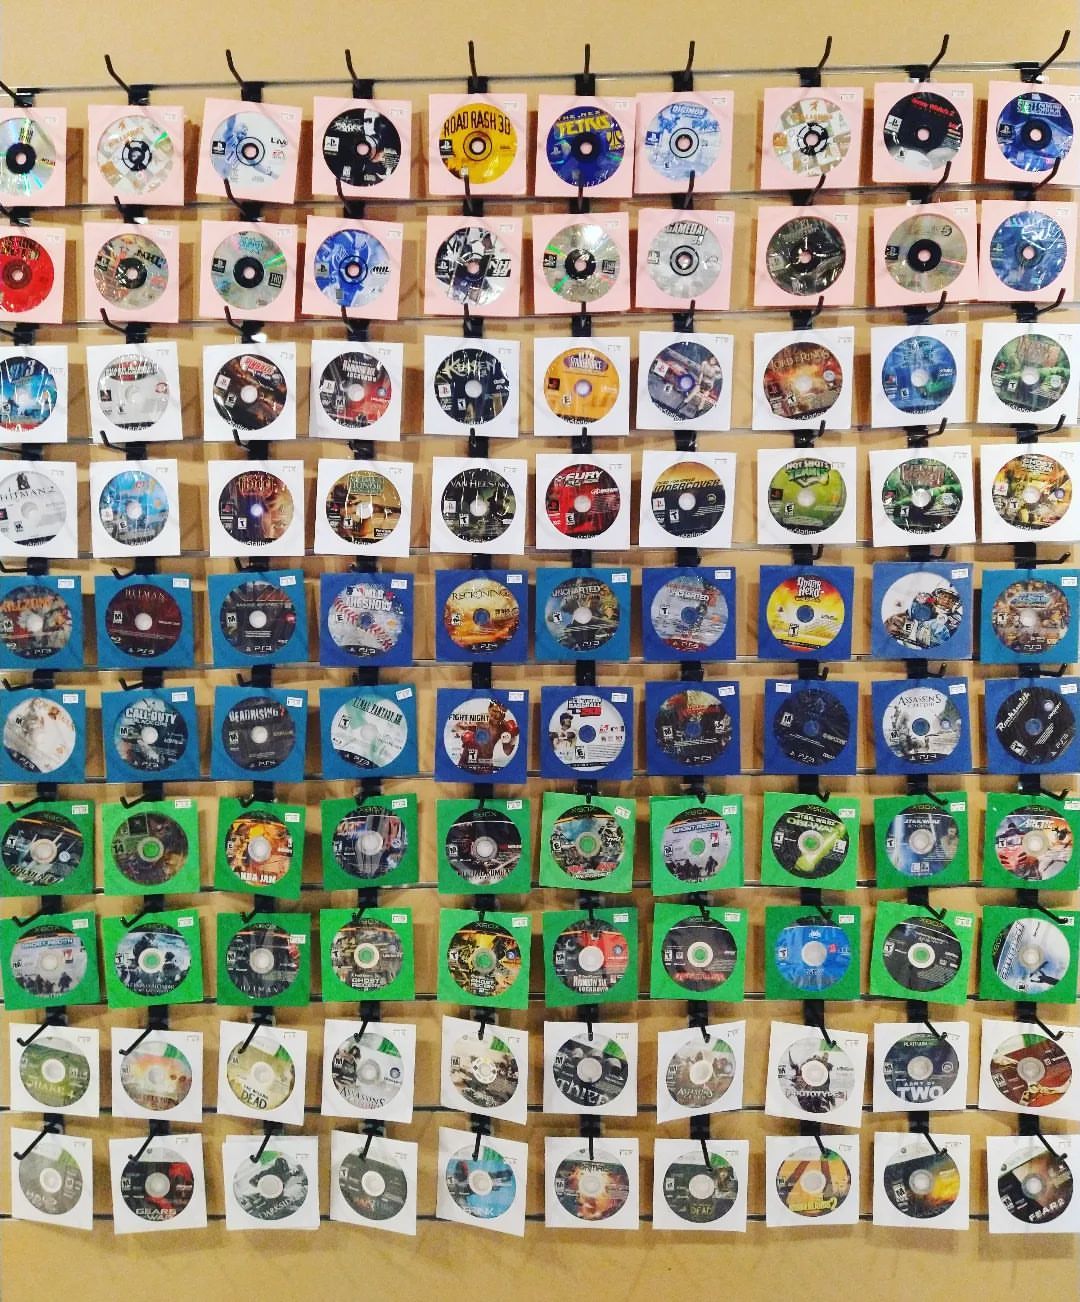 Welcome to the wall of 100 games! We have a lot of loose disc games that we will be adding peridically to the wall in addition to the hundreds of others on the shelves throughout the store!

#hudsonsvideogames #hudsonsvideogamesaltamonte #videogames #ps1 #ps2 #ps3 #xbox #xbox360 #sony #playstation #microsoft  #wallofgames #retrogames  (at Altamonte Mall)
https://www.instagram.com/p/Cf9IacwL7nW/?igshid=NGJjMDIxMWI=